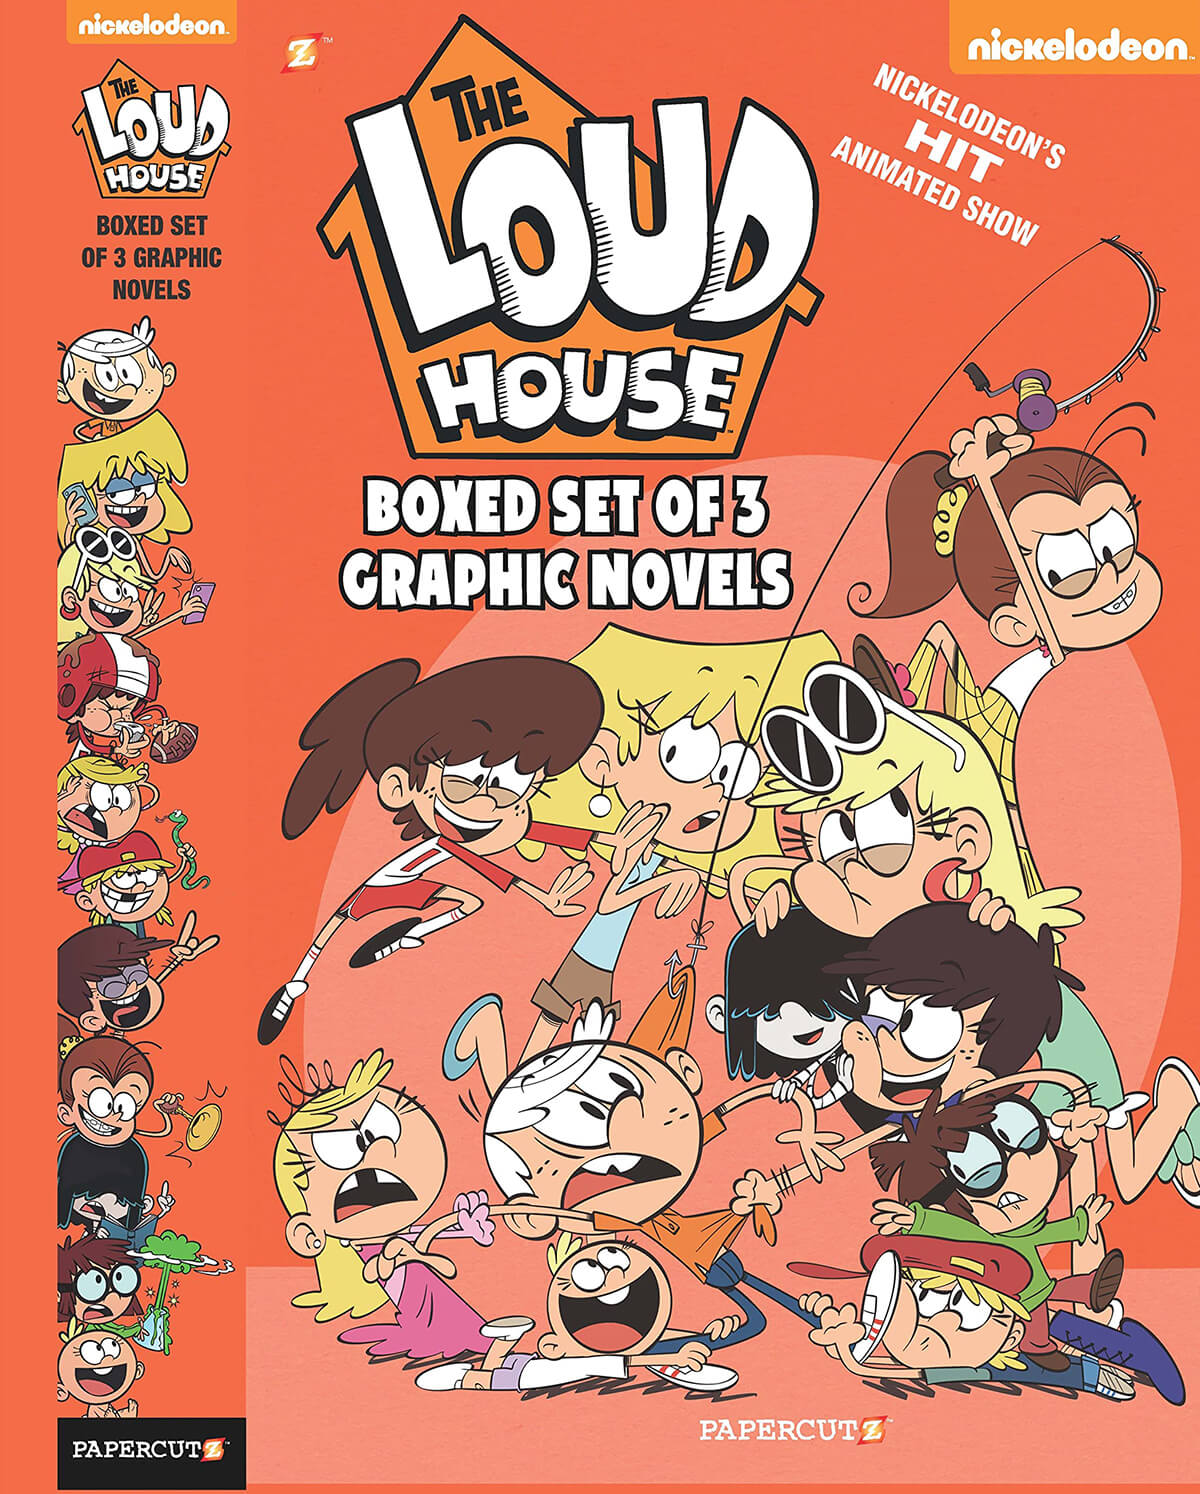 The cover of The Loud House graphic novel box set with illustrations of the show’s characters climbing over each other.